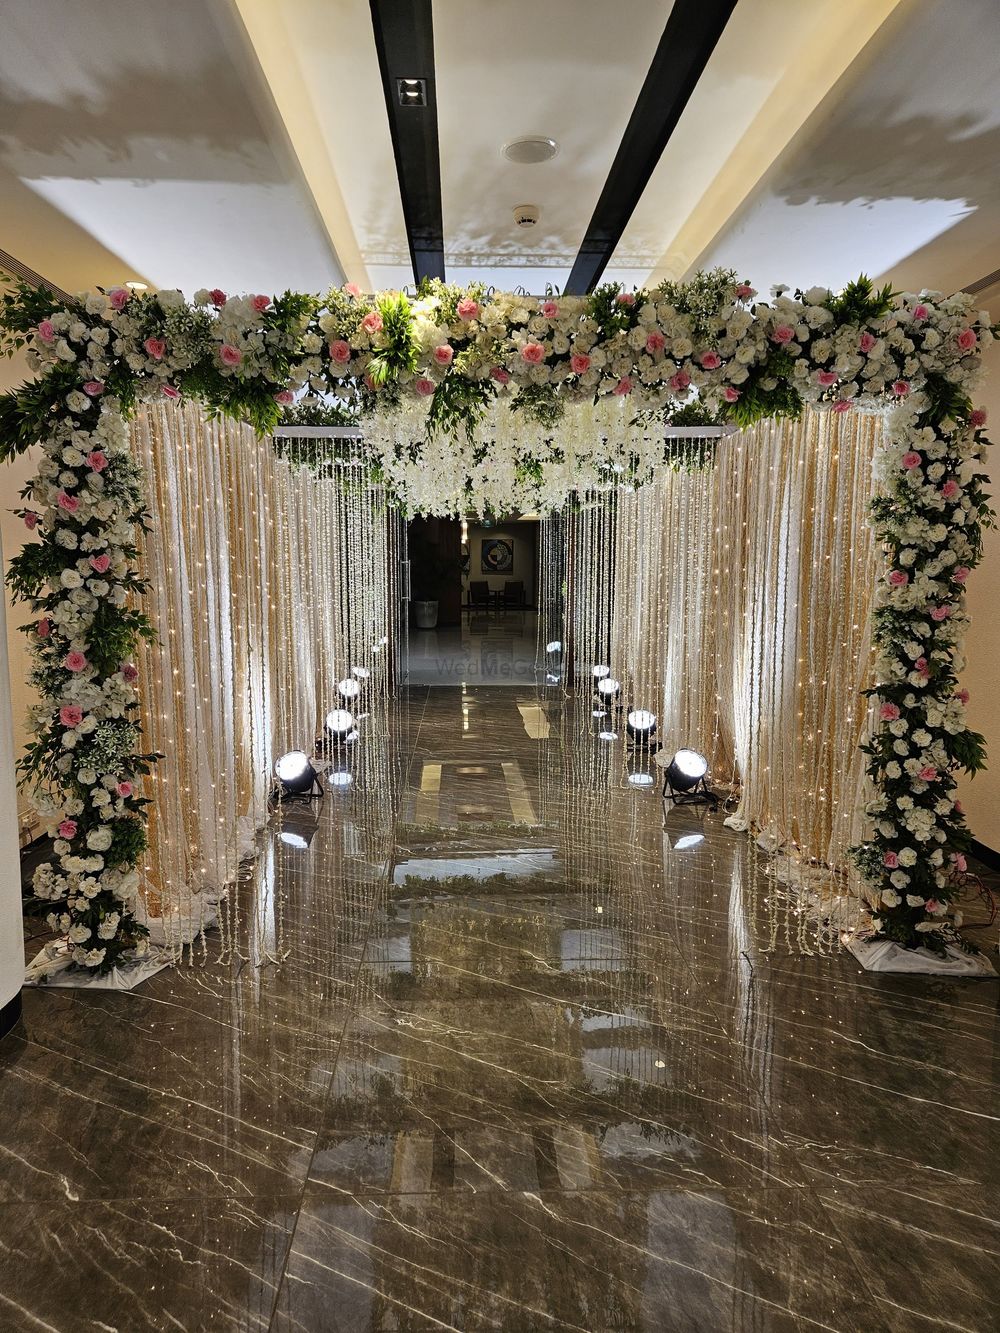 Photo By Four Points by Sheraton - Vashi - Venues